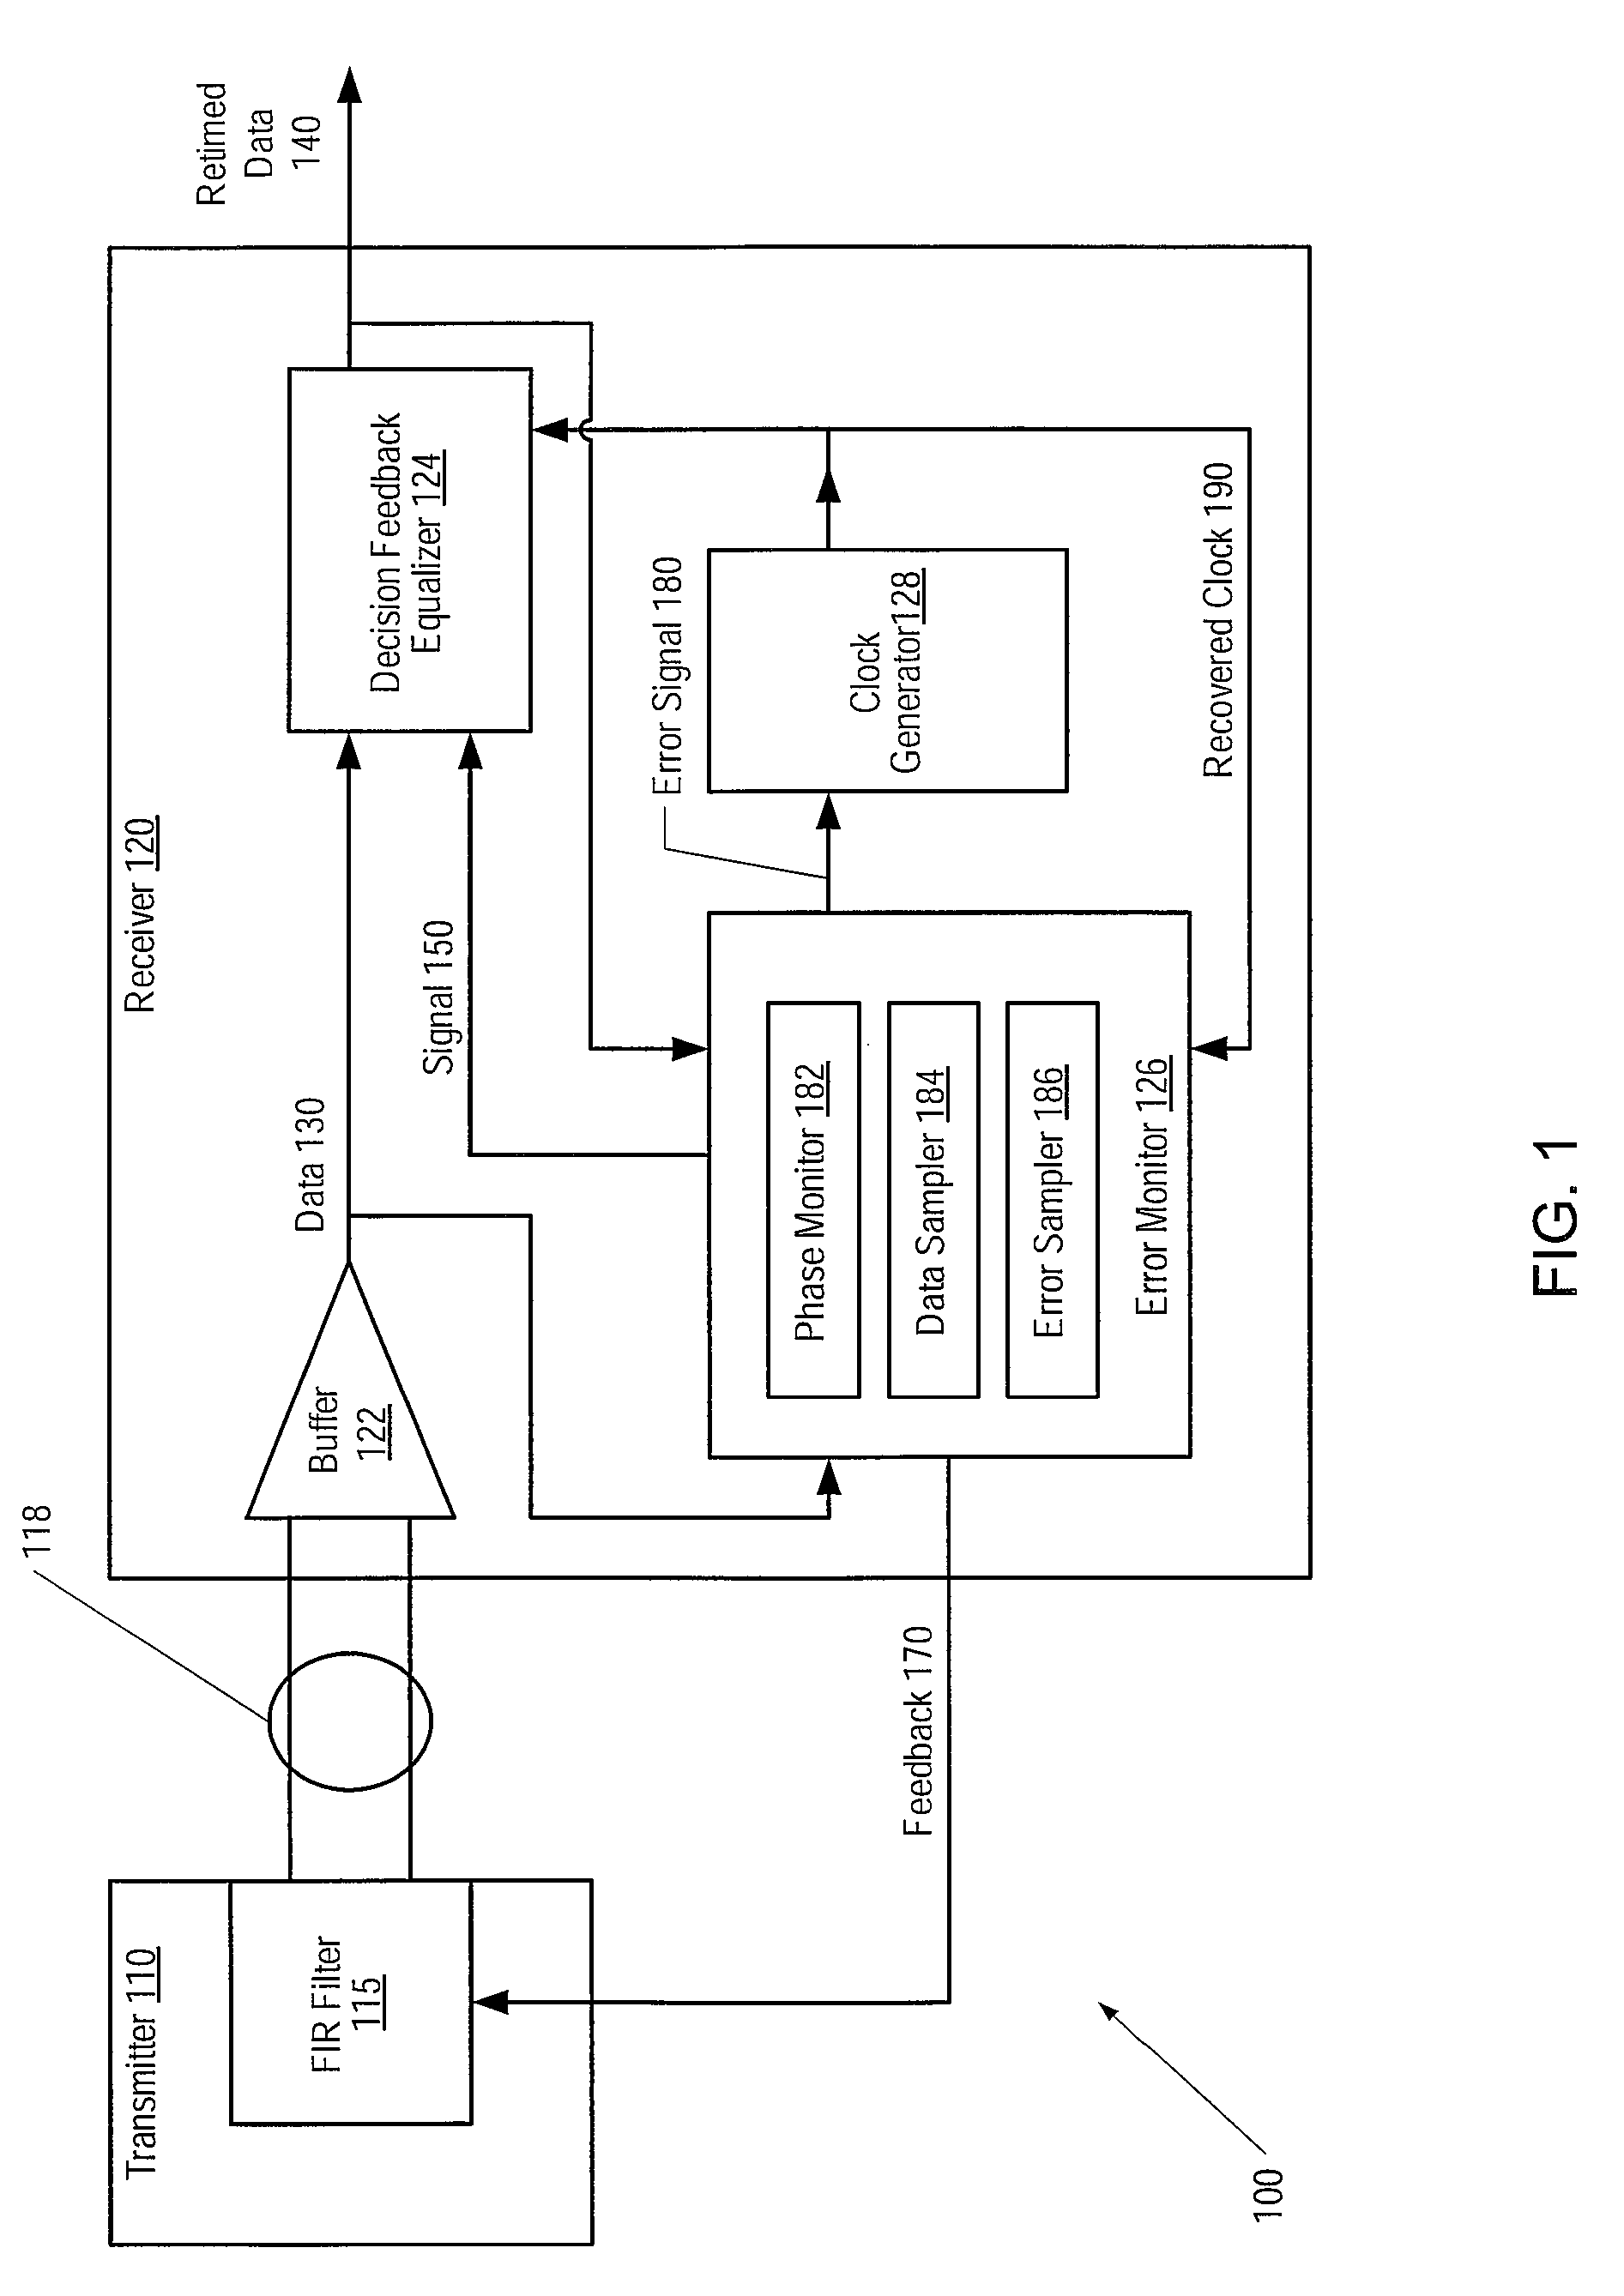 An integrated equalization and cdr adaptation engine with single error monitor circuit